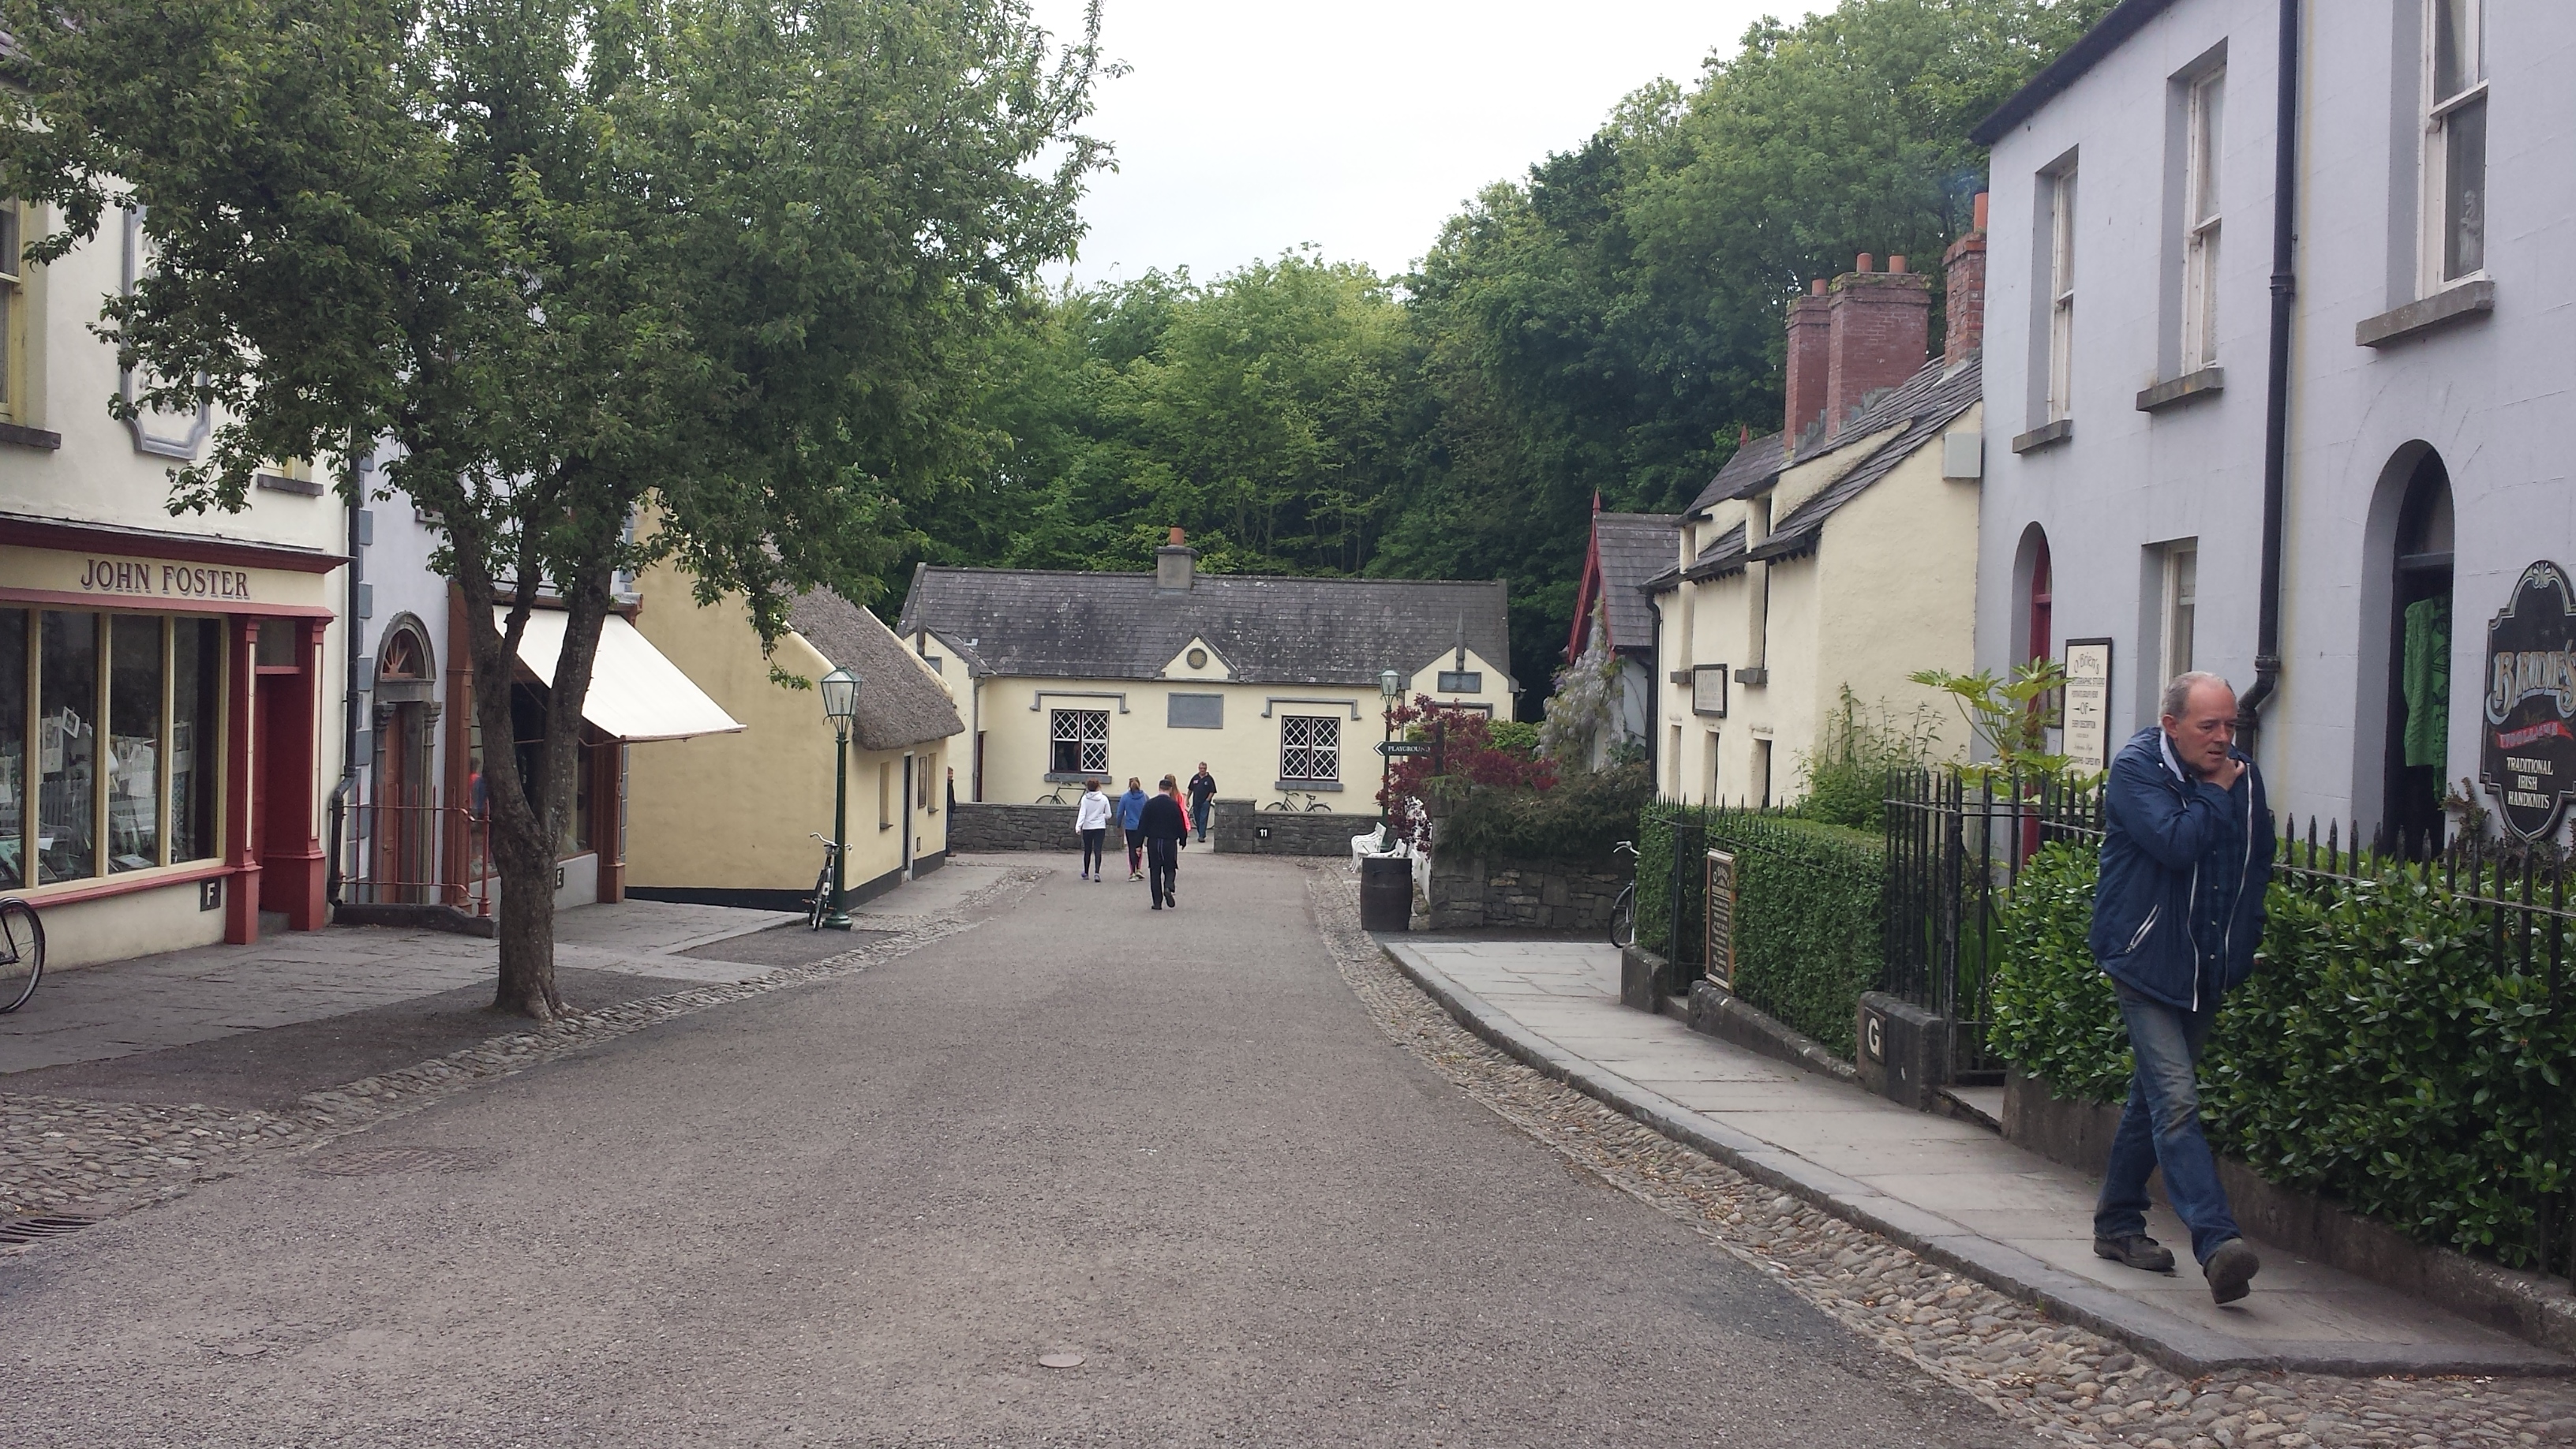 picture of a small town. There are colorful, traditional irish buildings on either side of the road.